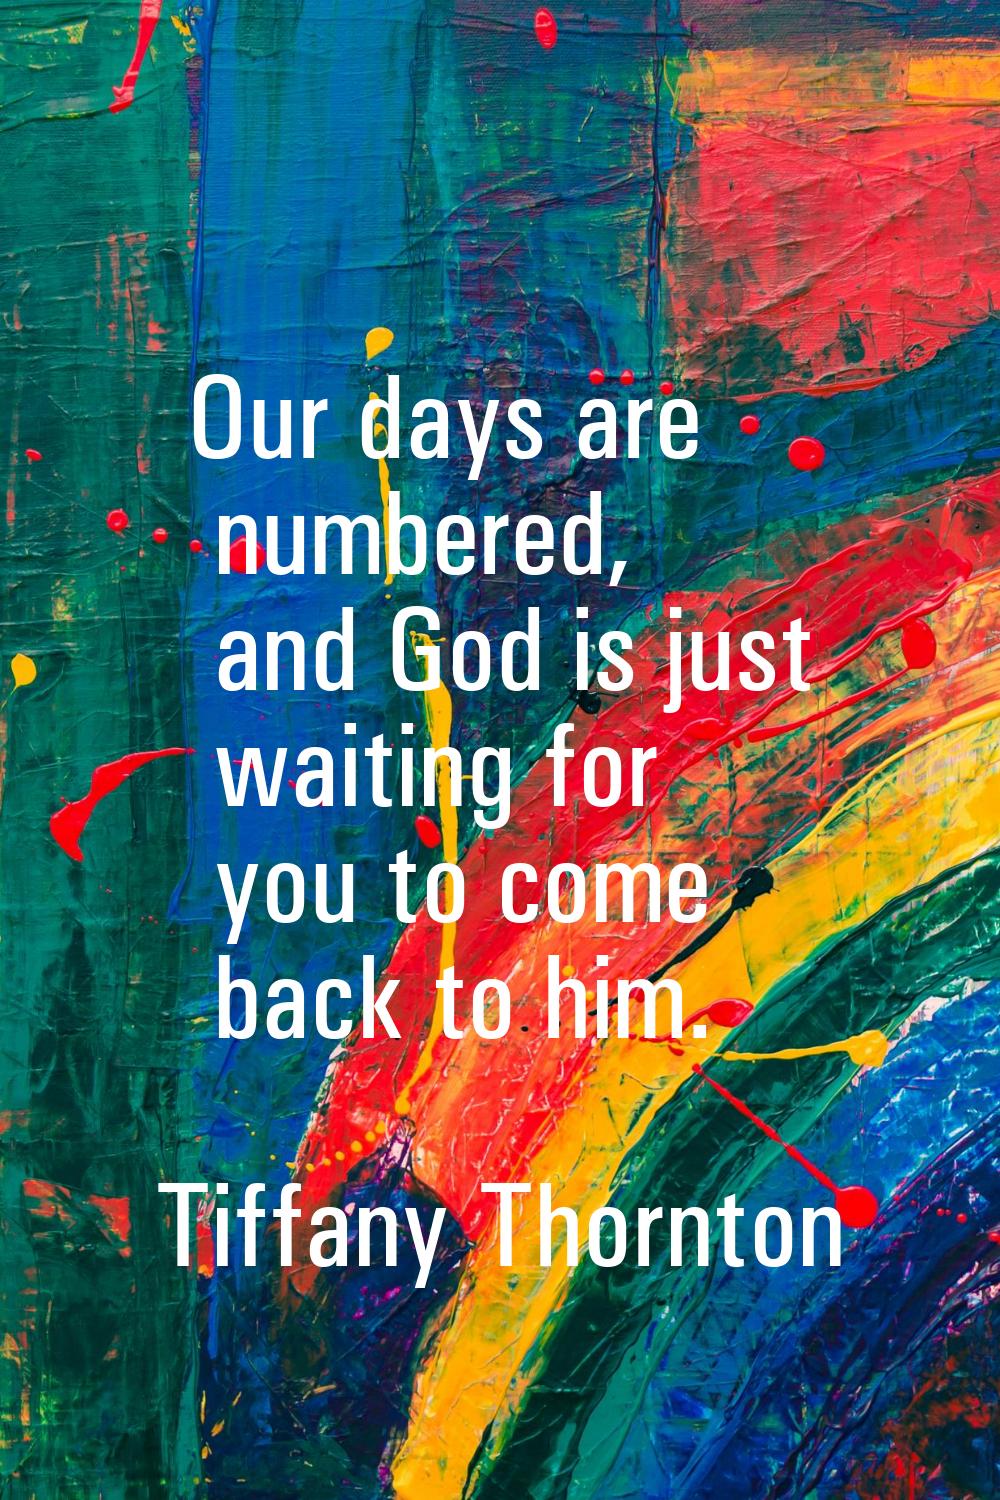 Our days are numbered, and God is just waiting for you to come back to him.